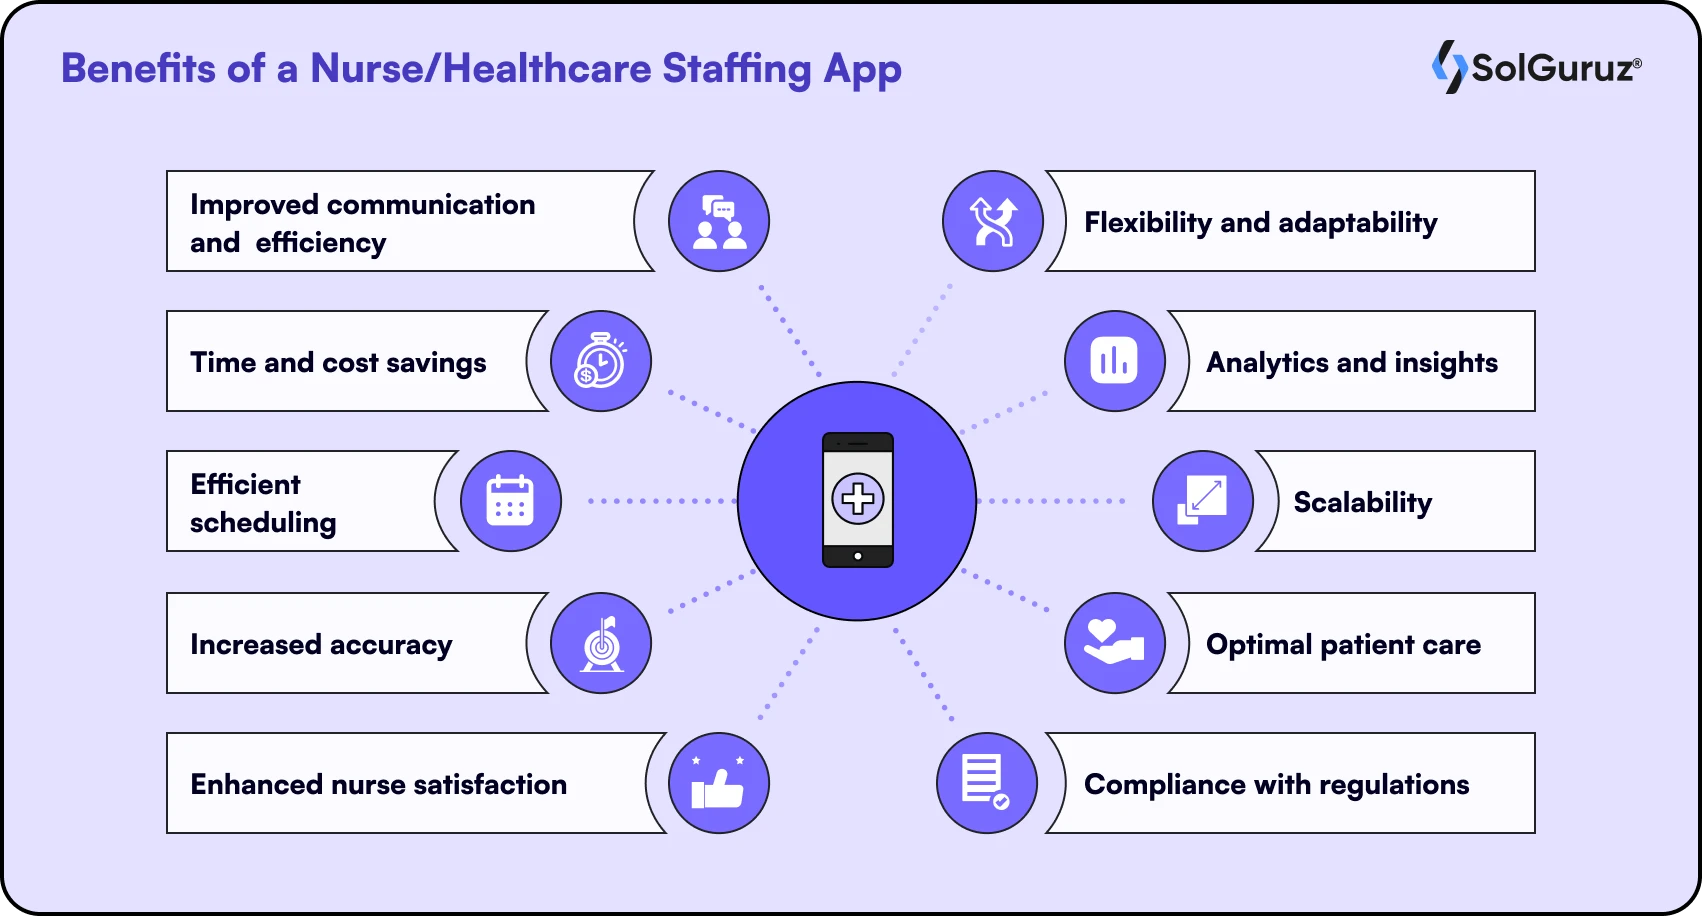 Benefits of a Healthcare Staffing App